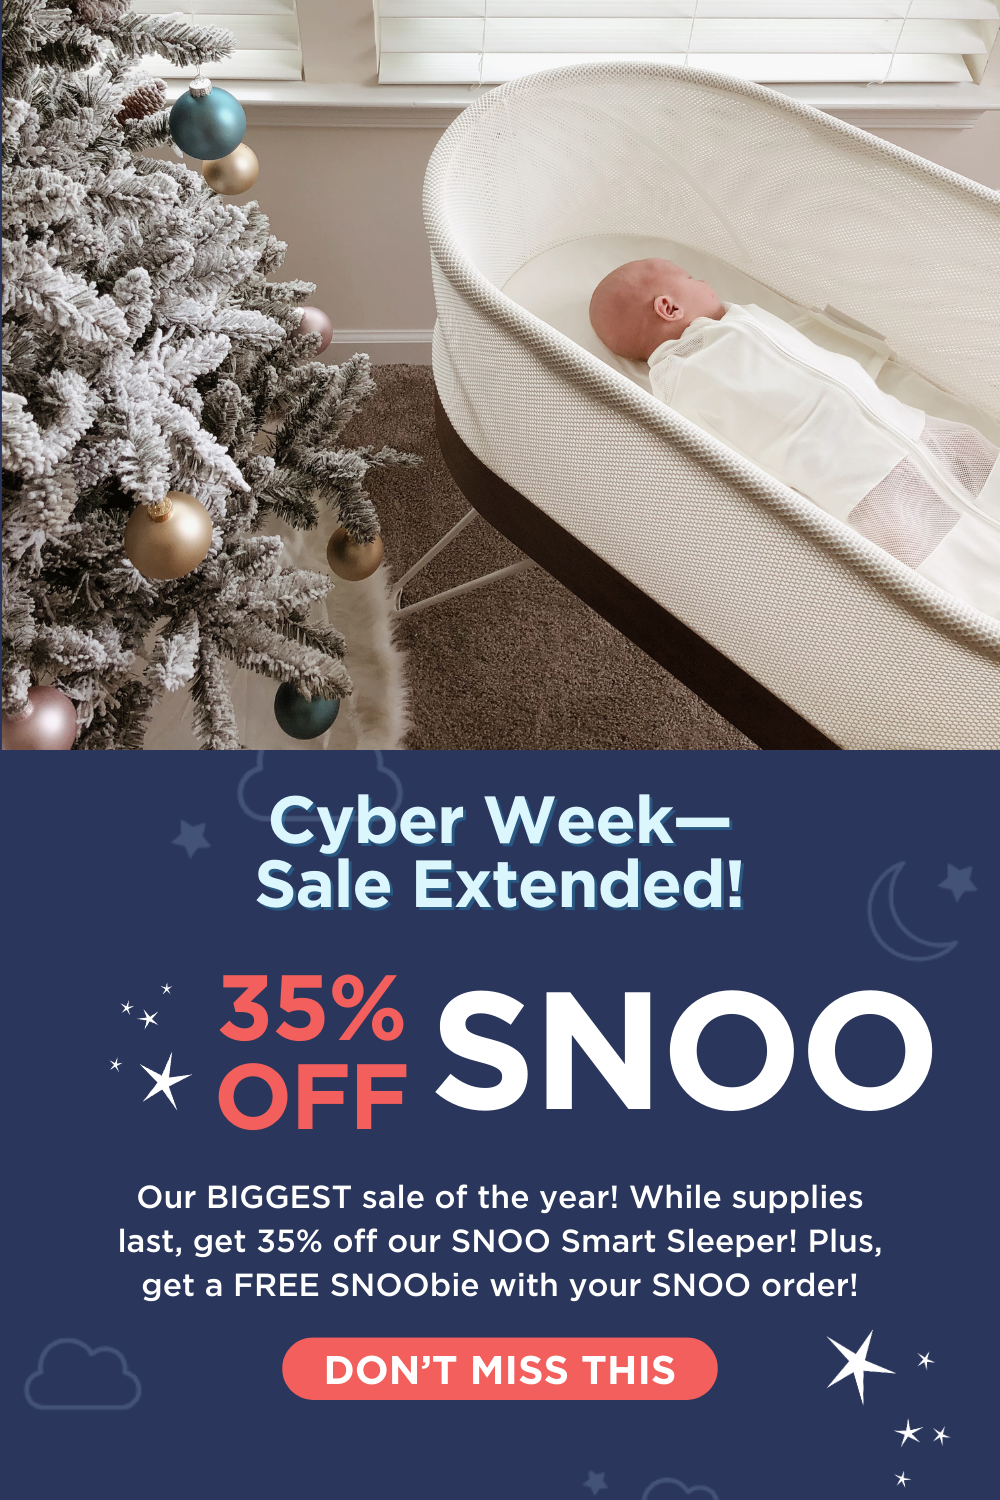 Cyber Week—Sale Extended! 35% Off SNOO! Our BIGGEST sale of the year! While supplies last, get 35% off our SNOO Smart Sleeper! Plus, get a FREE SNOObie with your SNOO order! DON'T MISS THIS